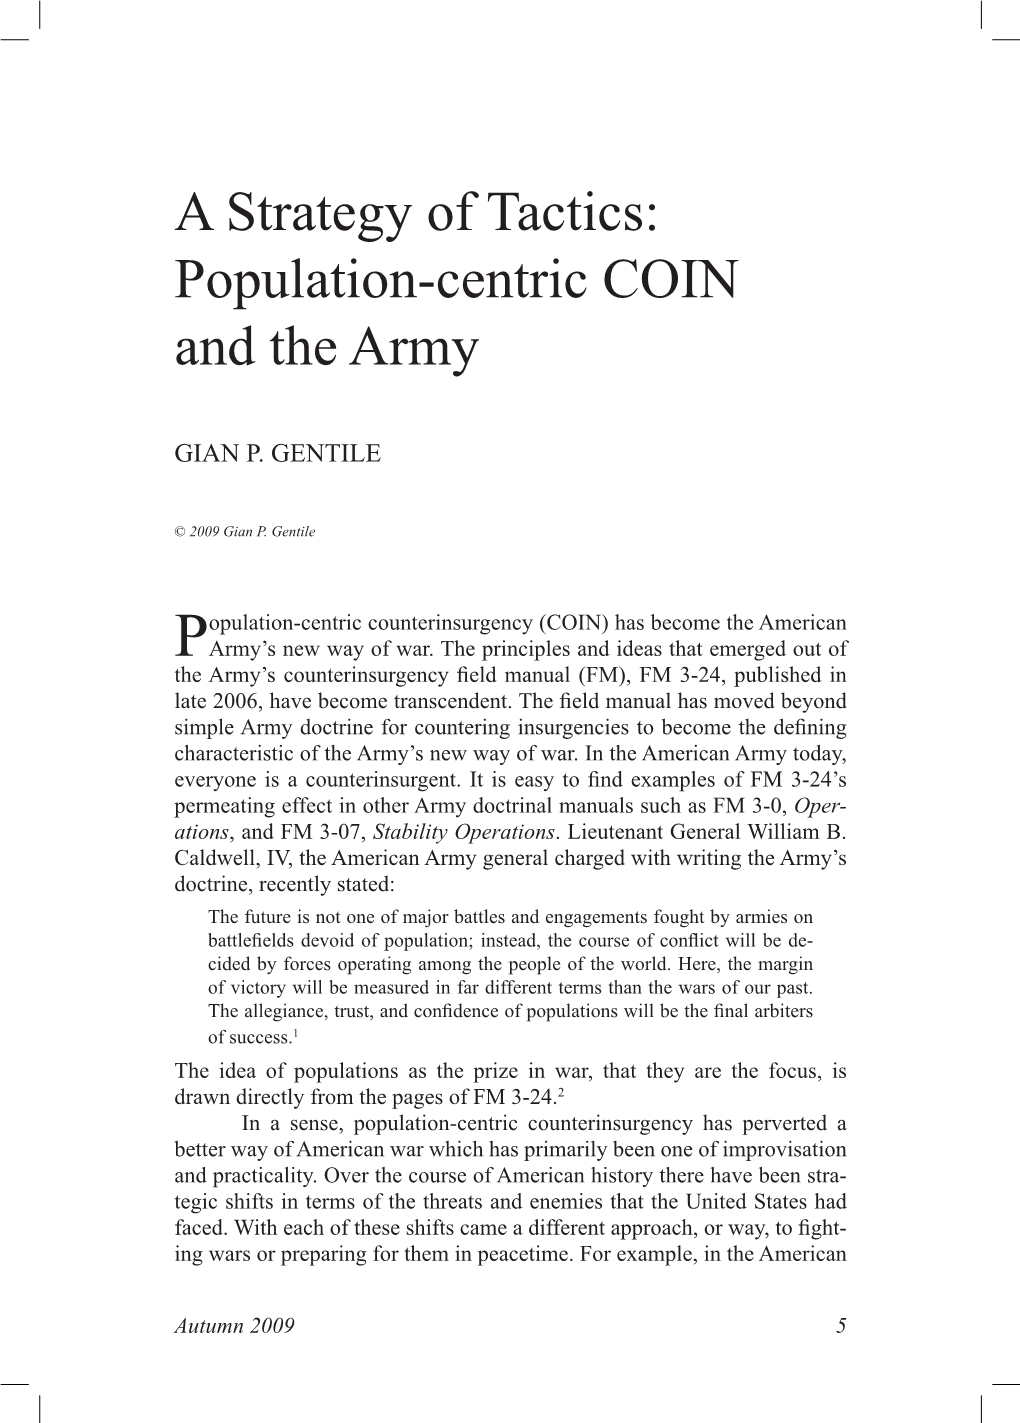 A Strategy of Tactics: Population-Centric COIN and the Army